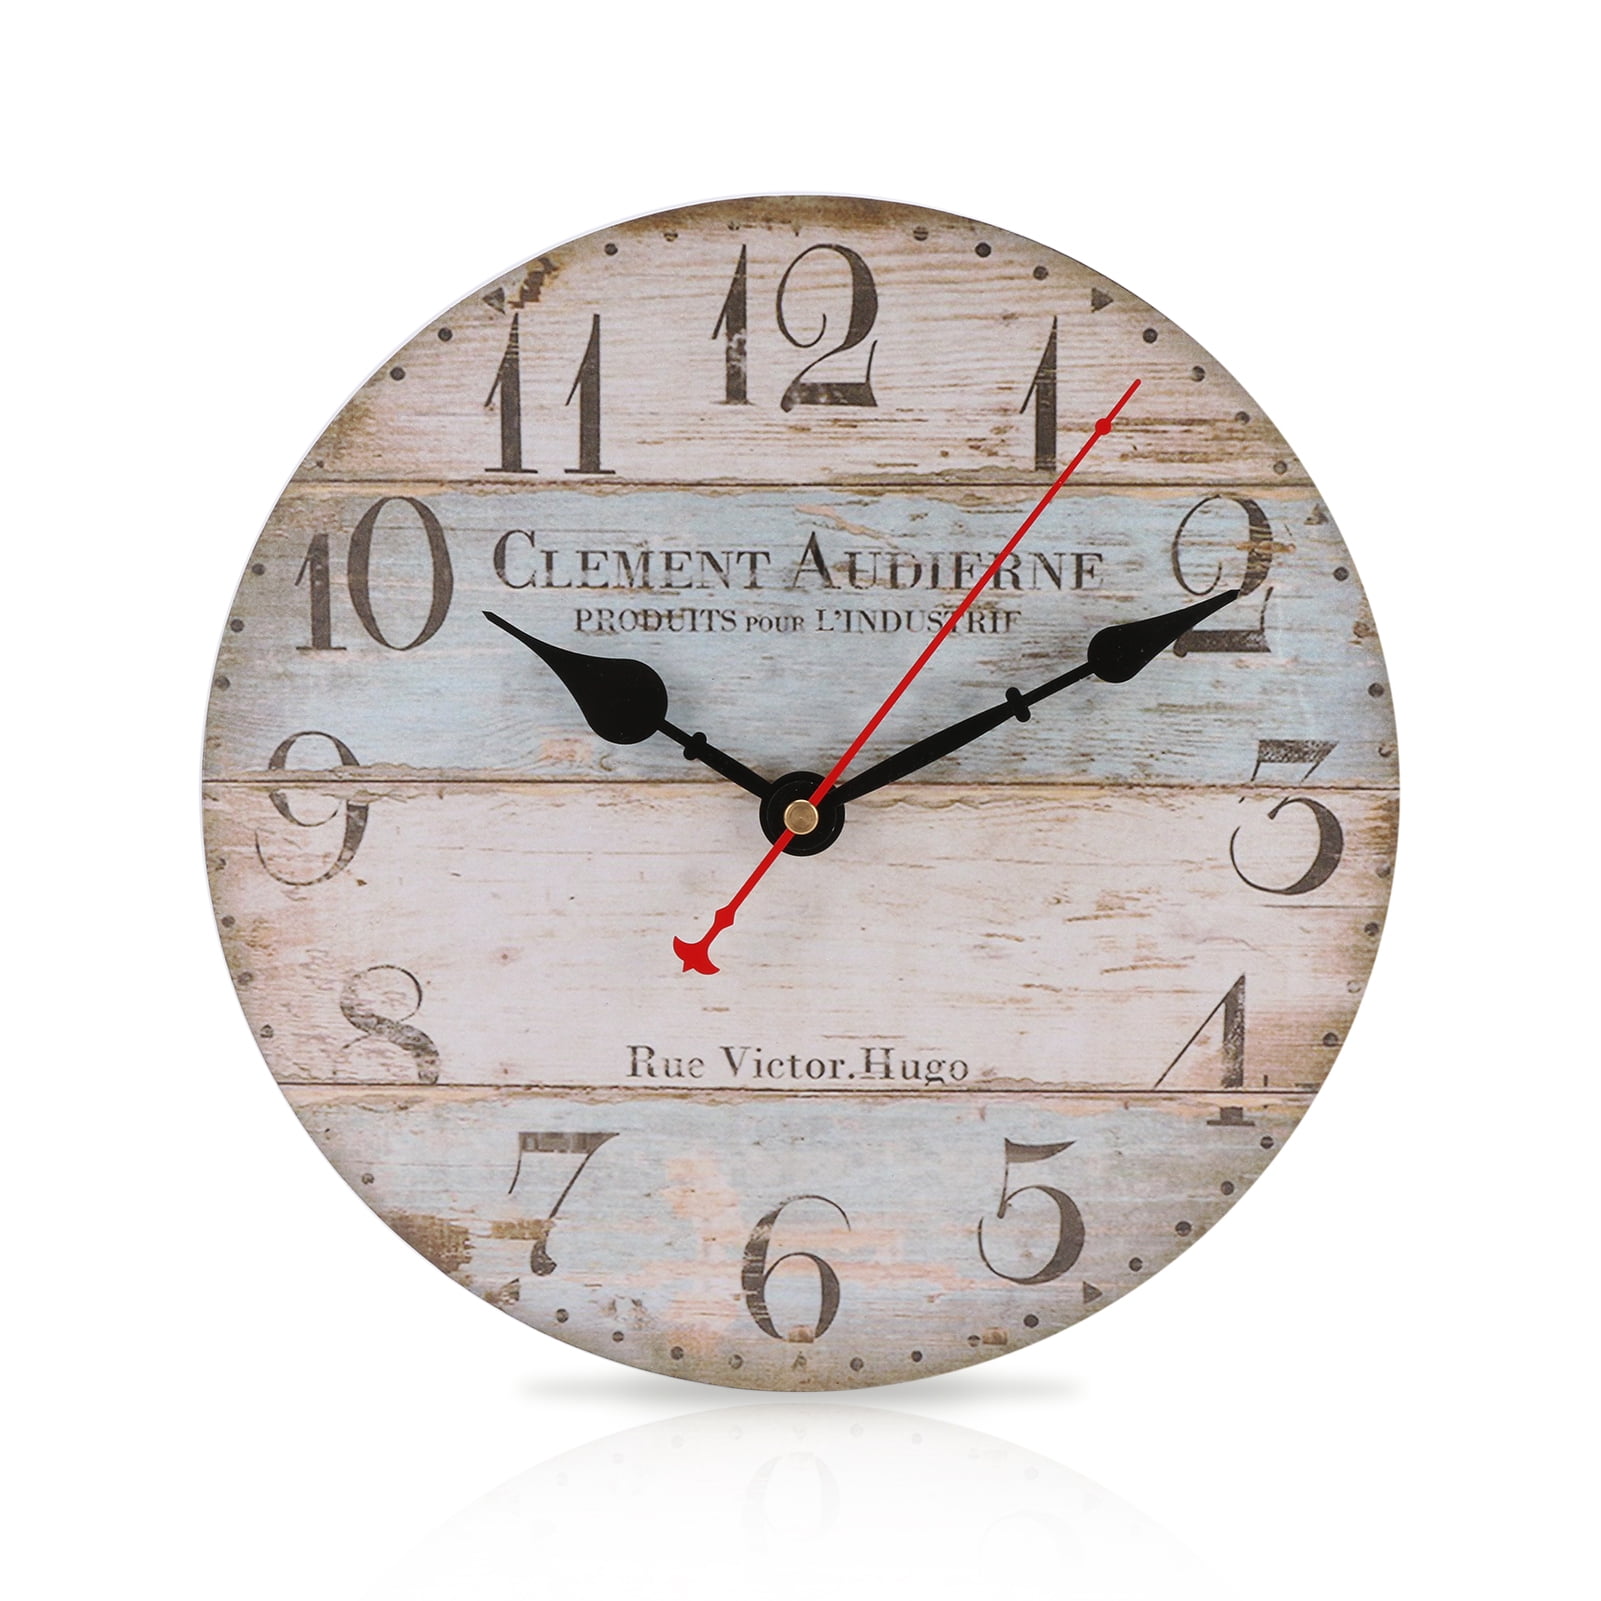 Wood Growth-Rings Wall Clock Battery Operated Non Ticking Silent Quartz Analog Rustic Farmhouse Round Clock Retro Decor for Home Kitchen Living Room Bathroom